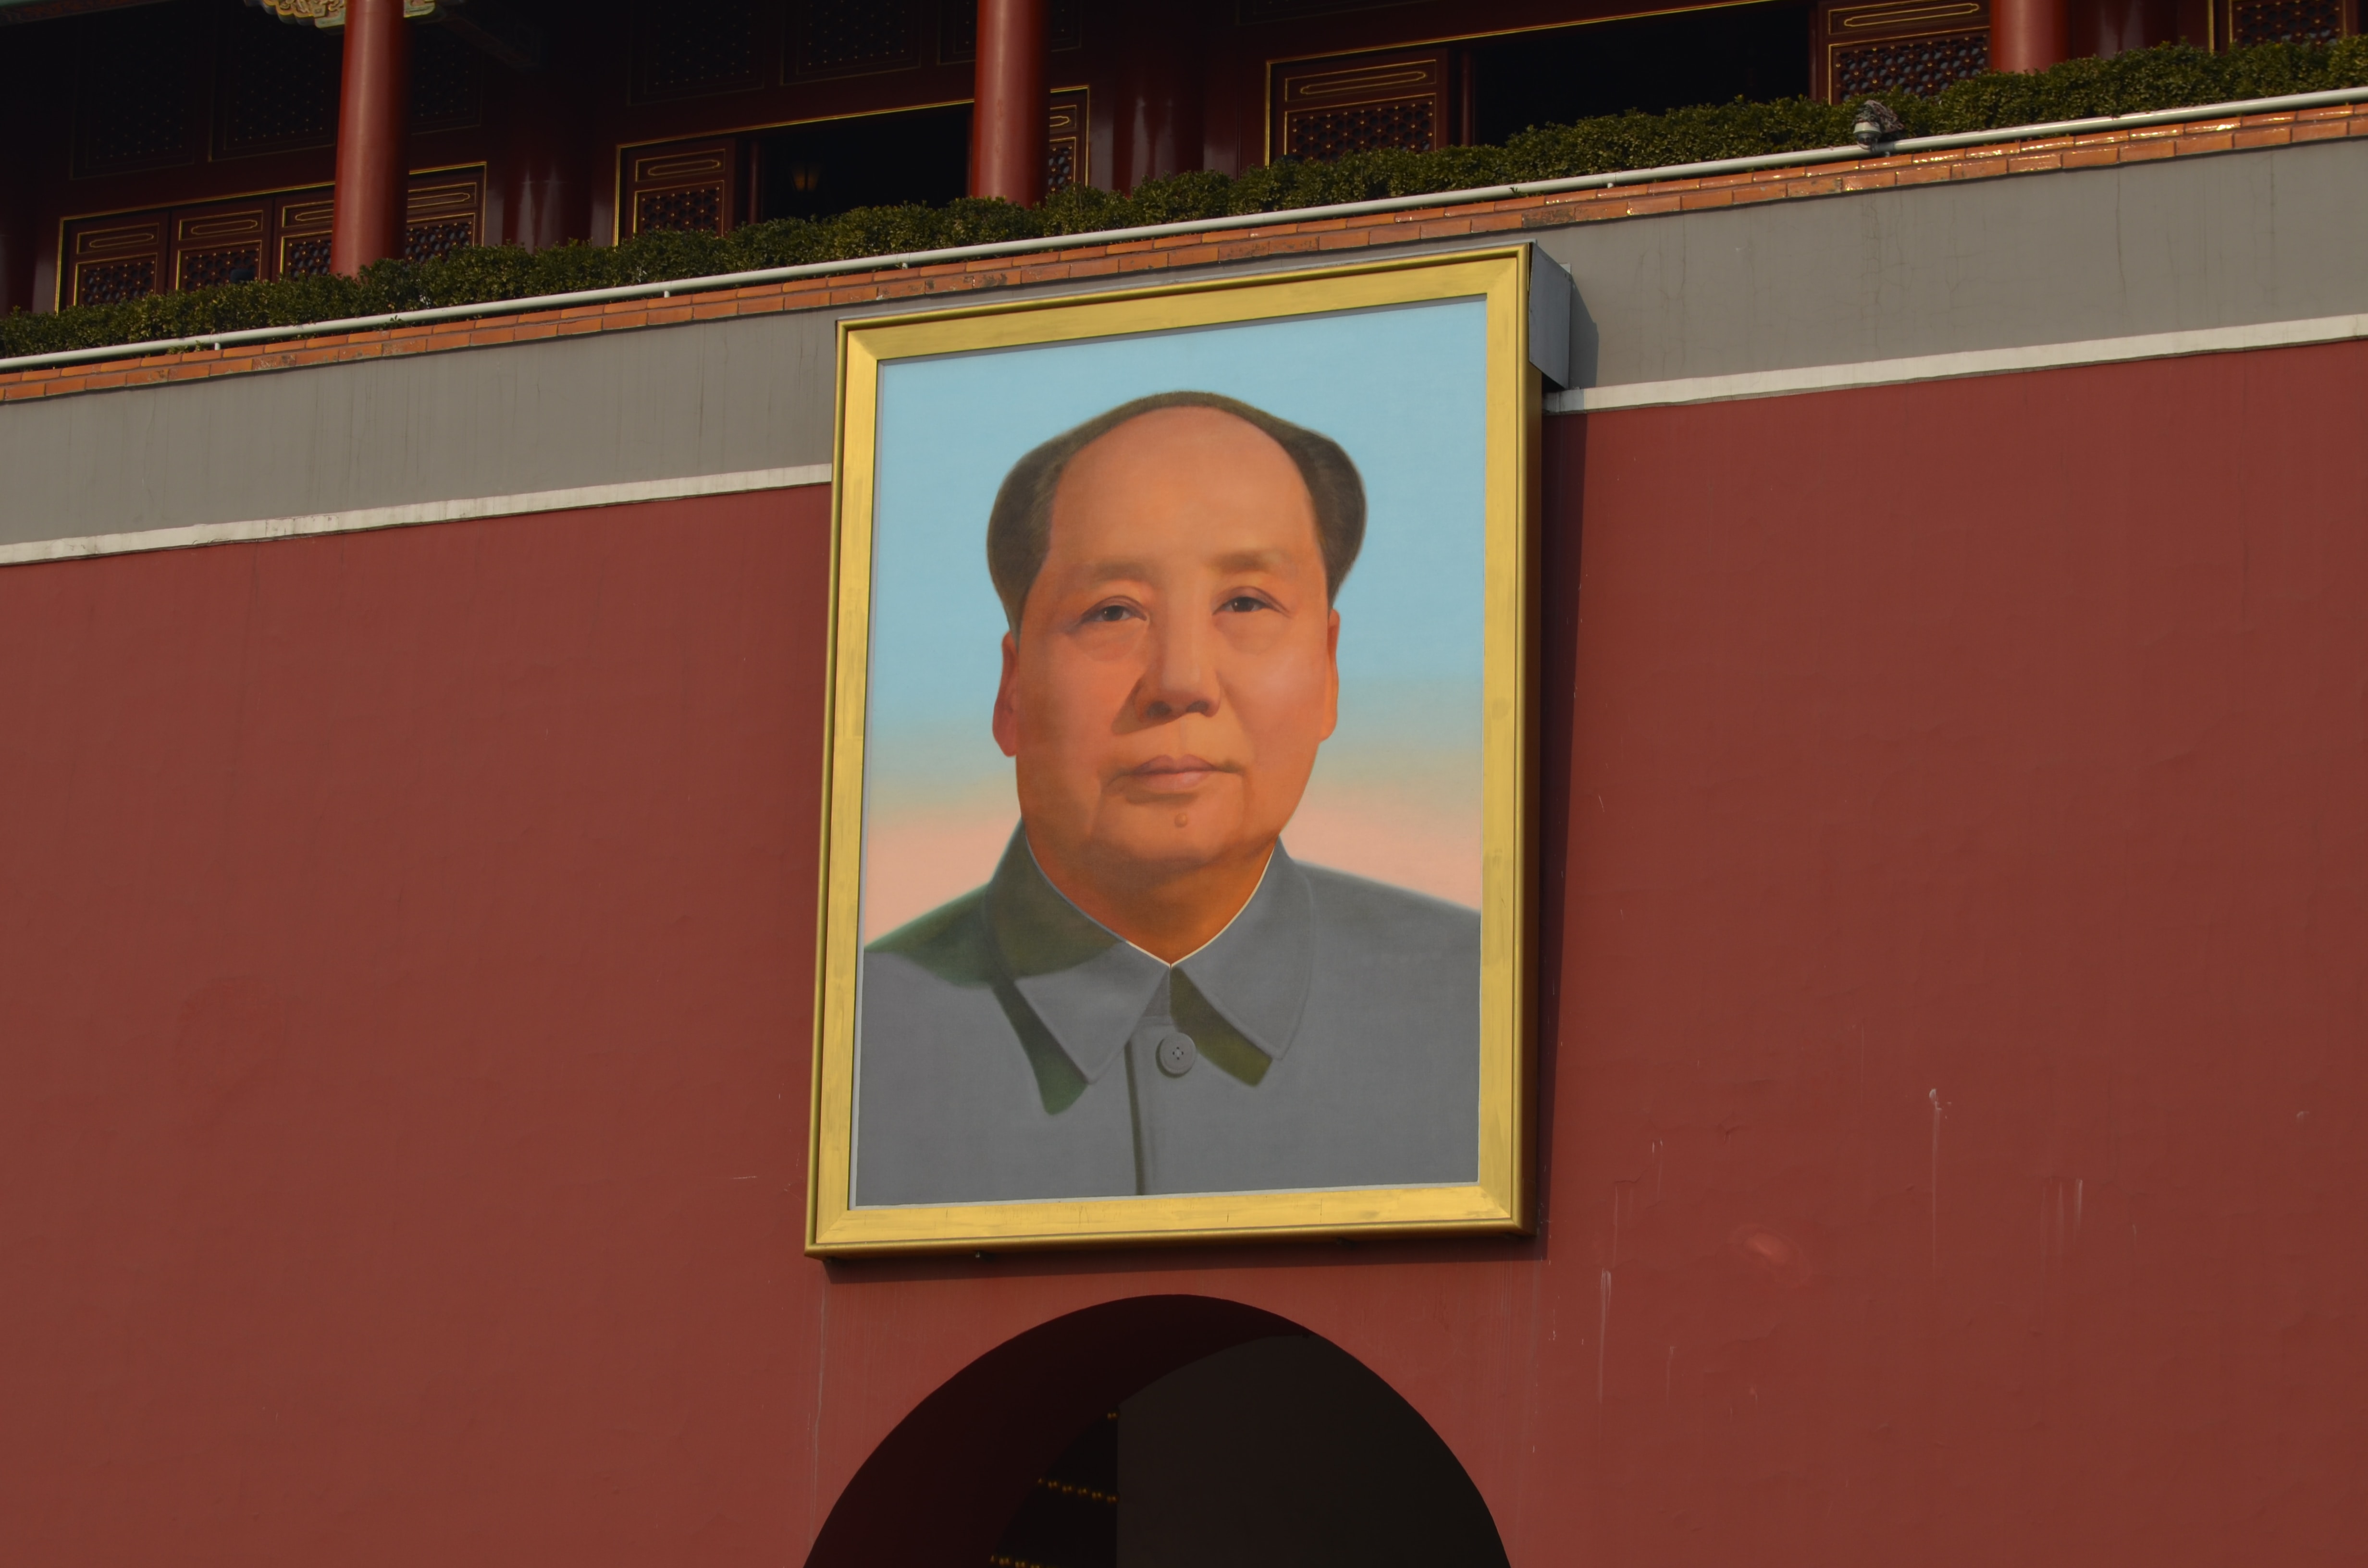 Painting of Mao hanging on building